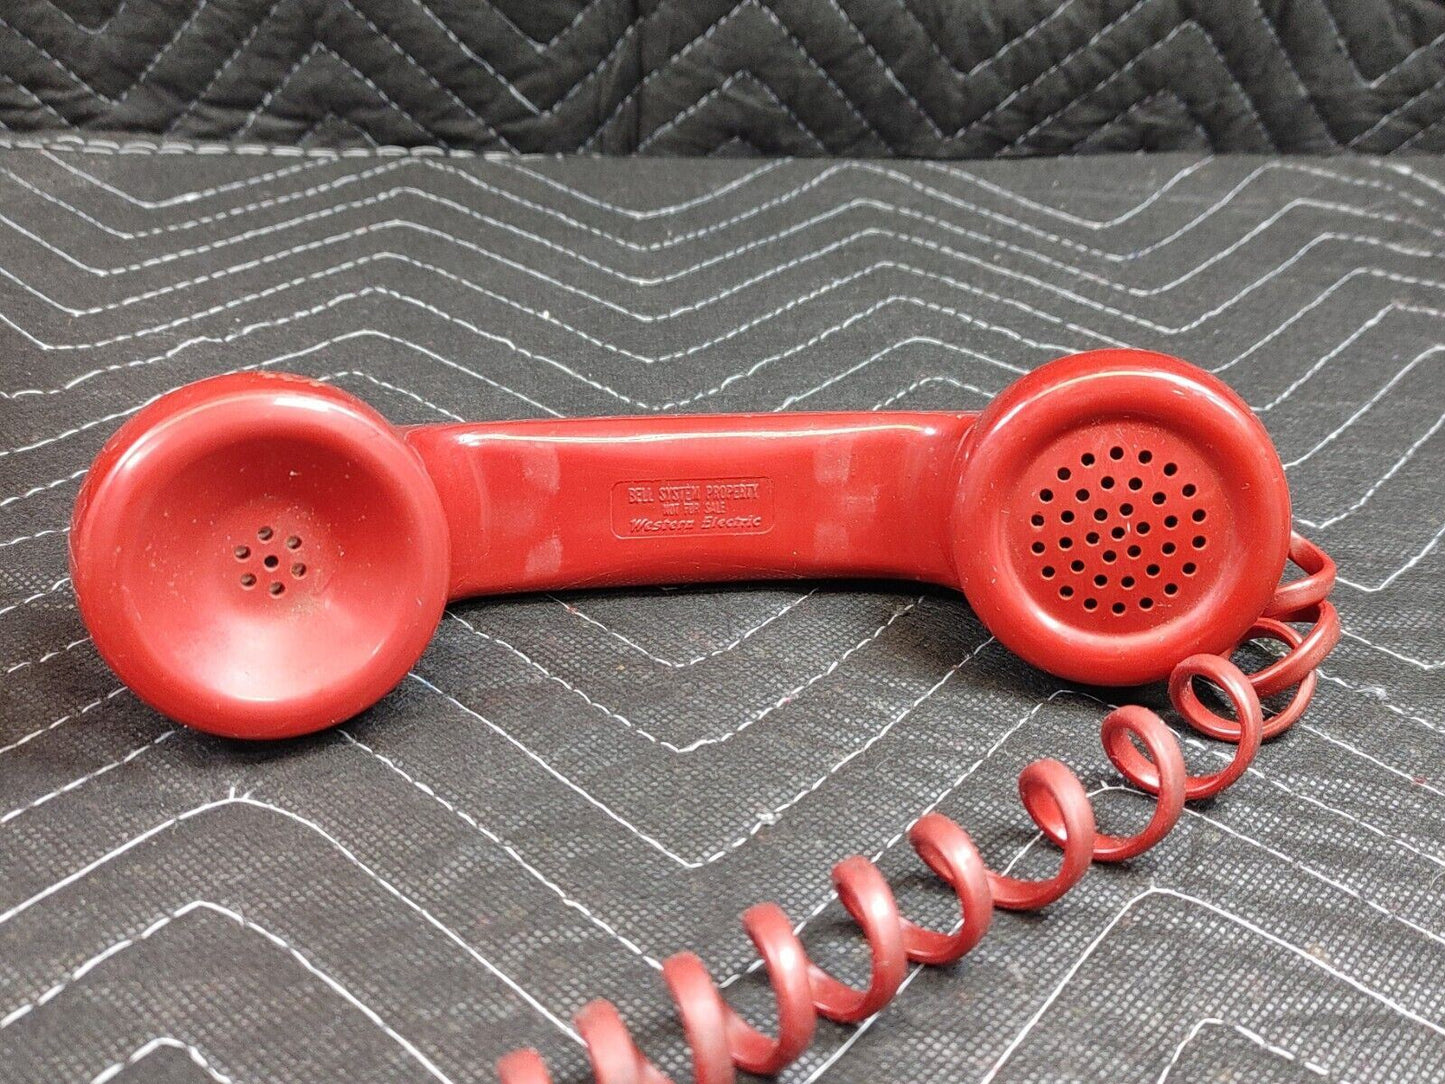 Vintage Bell System Western Electric Red Rotary Dial Desk Phone  # 500